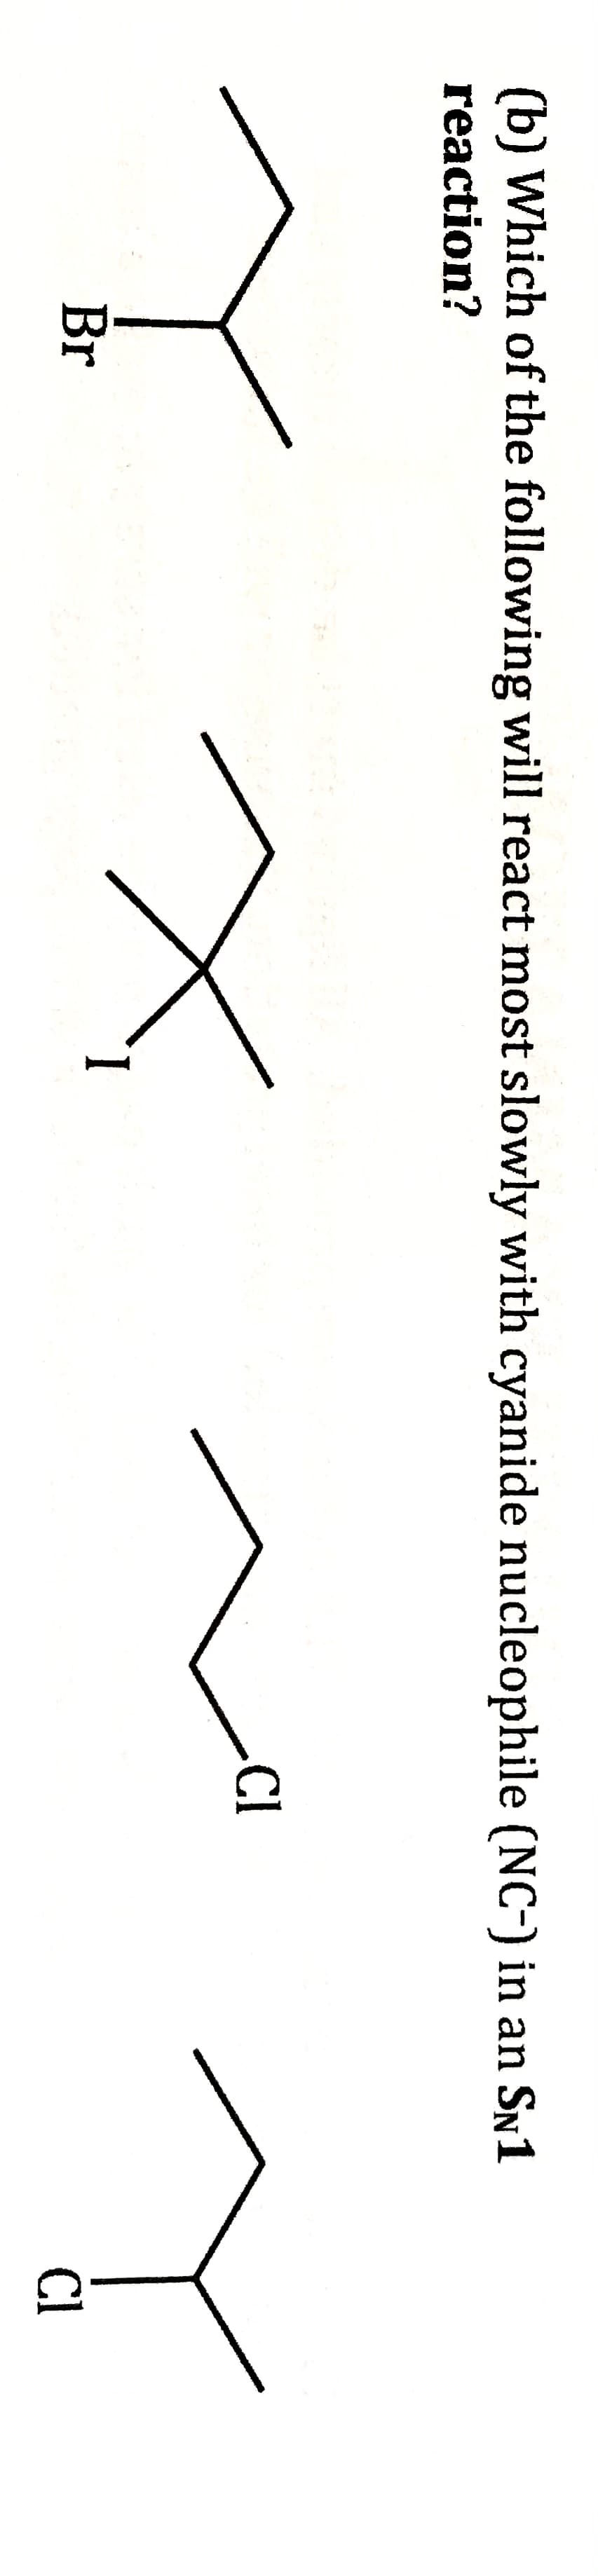 (b) Which of the following will react most slowly with cyanide nucleophile (NC-) in an SN1
reaction?
.CI
Br
Cl
